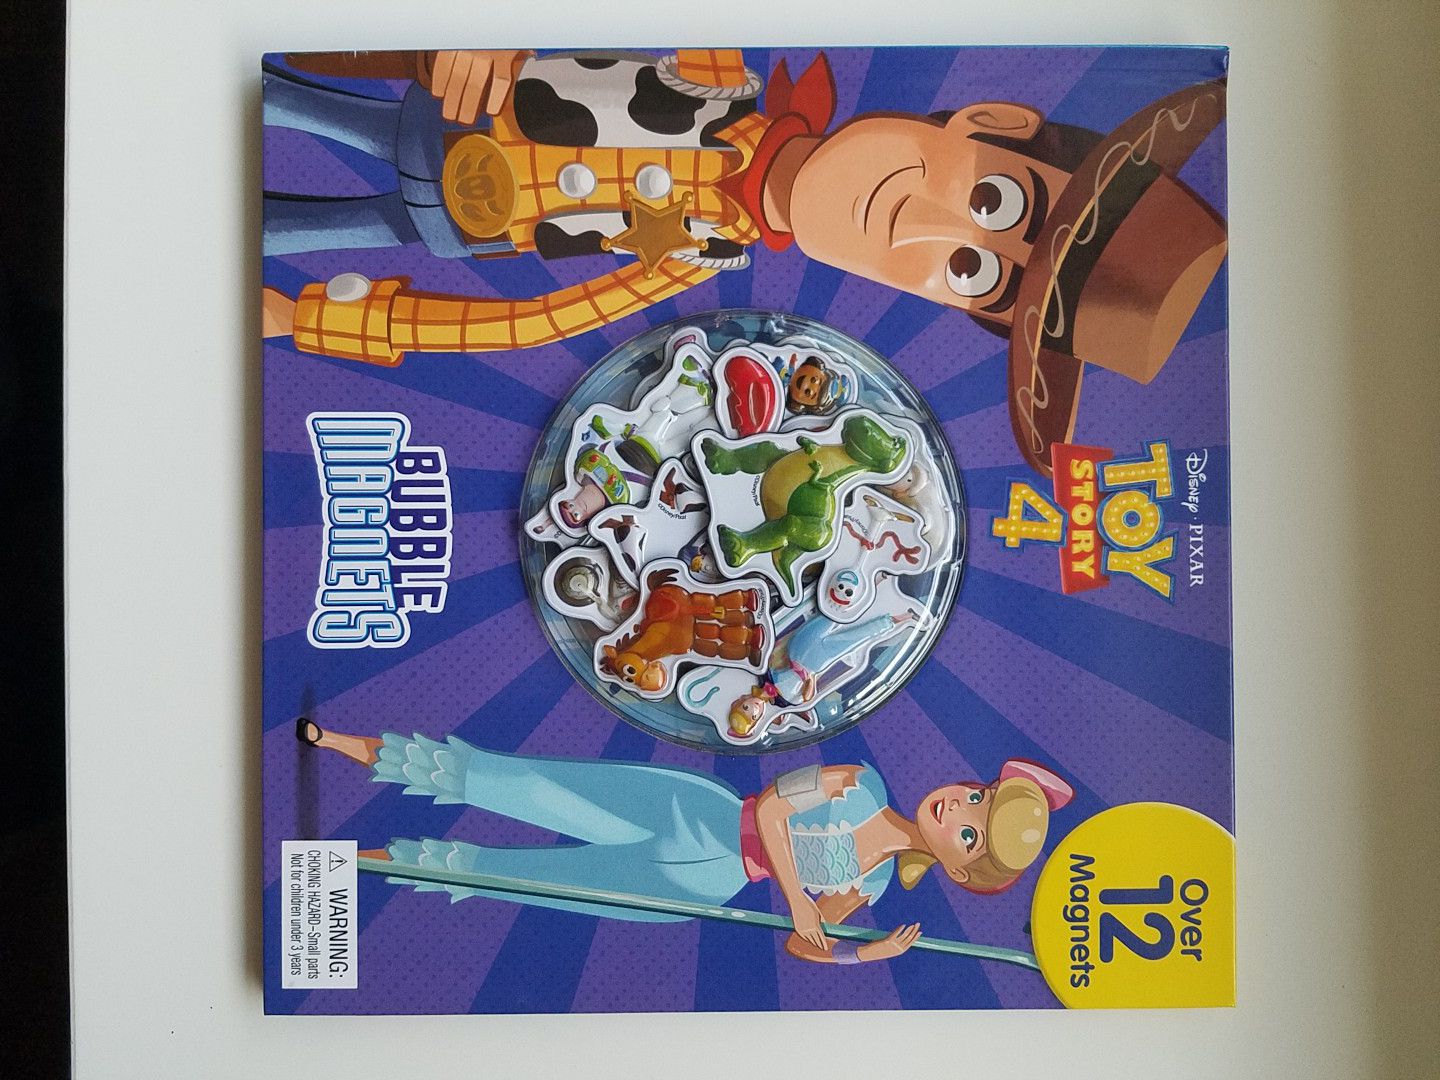 Toy story 4 magnet book